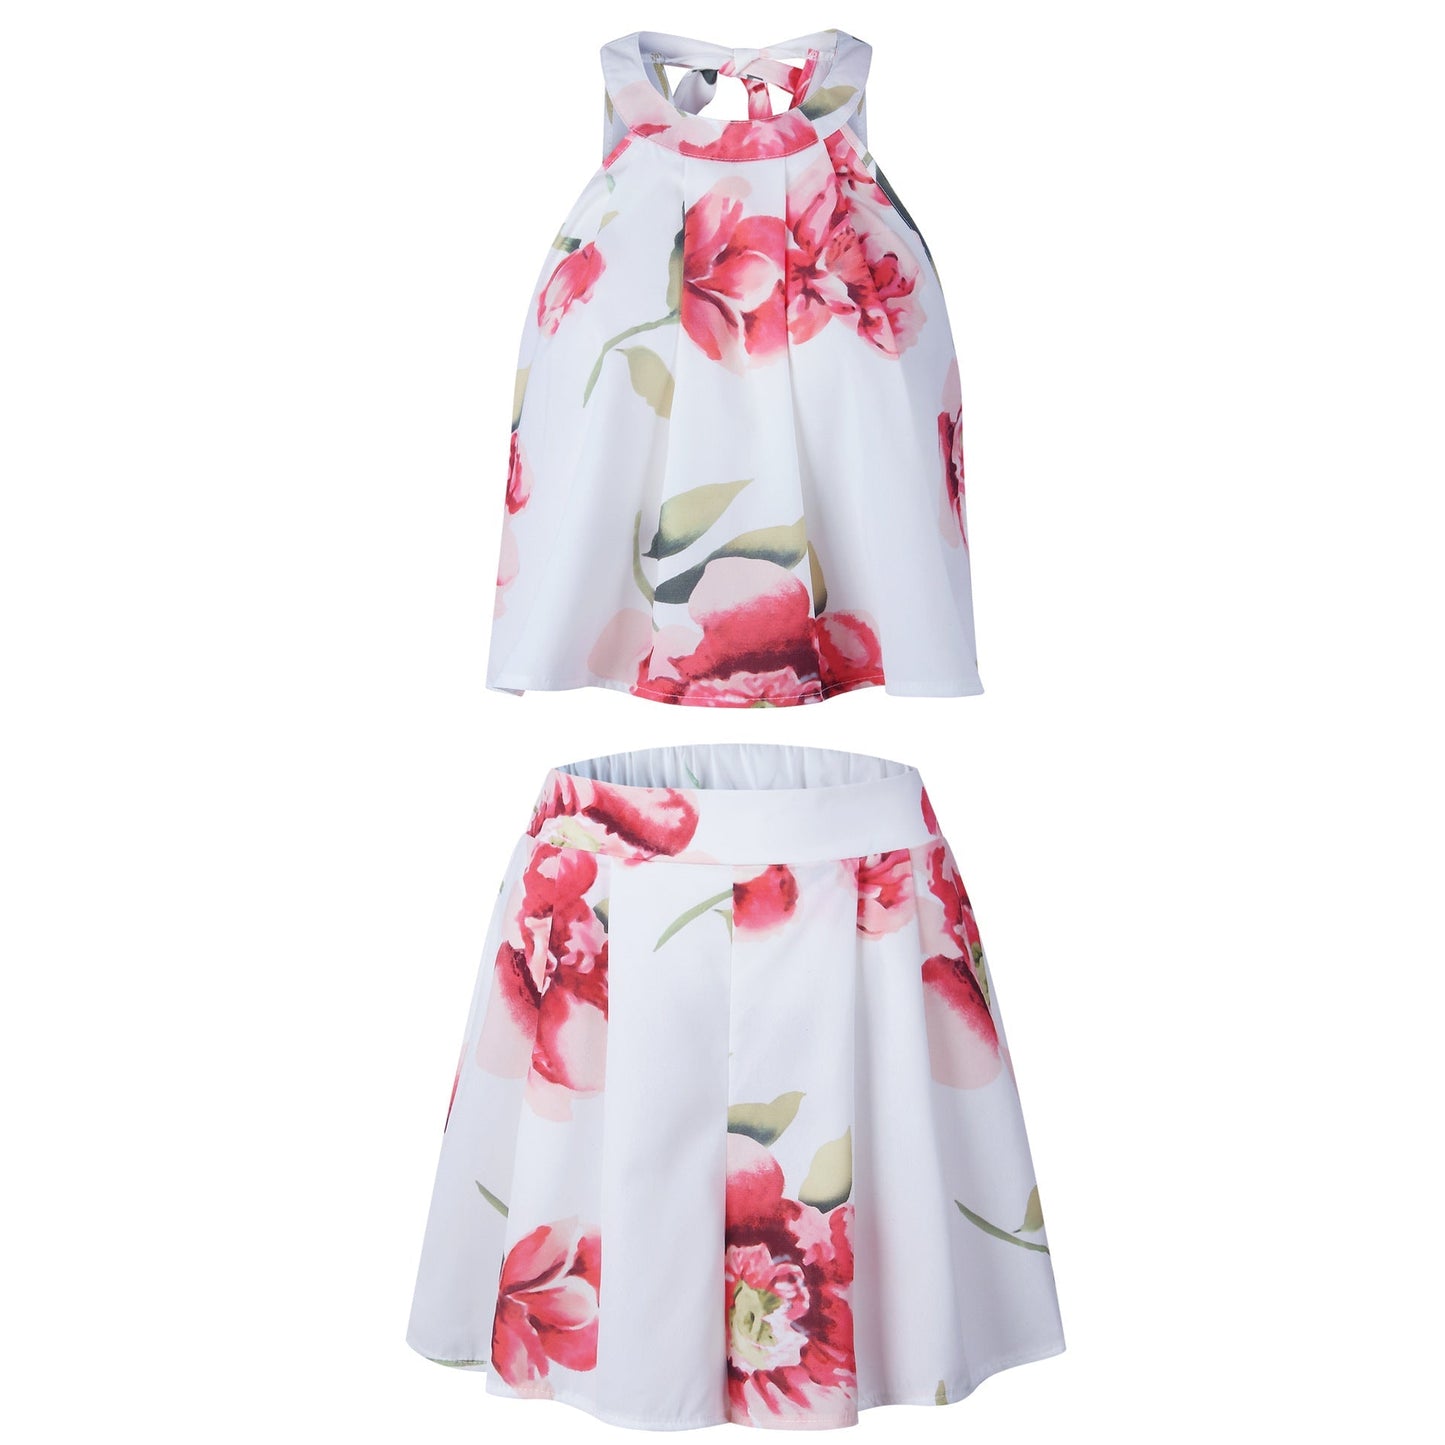 Antmvs White Floral Crop Top and Shorts Matching Sets